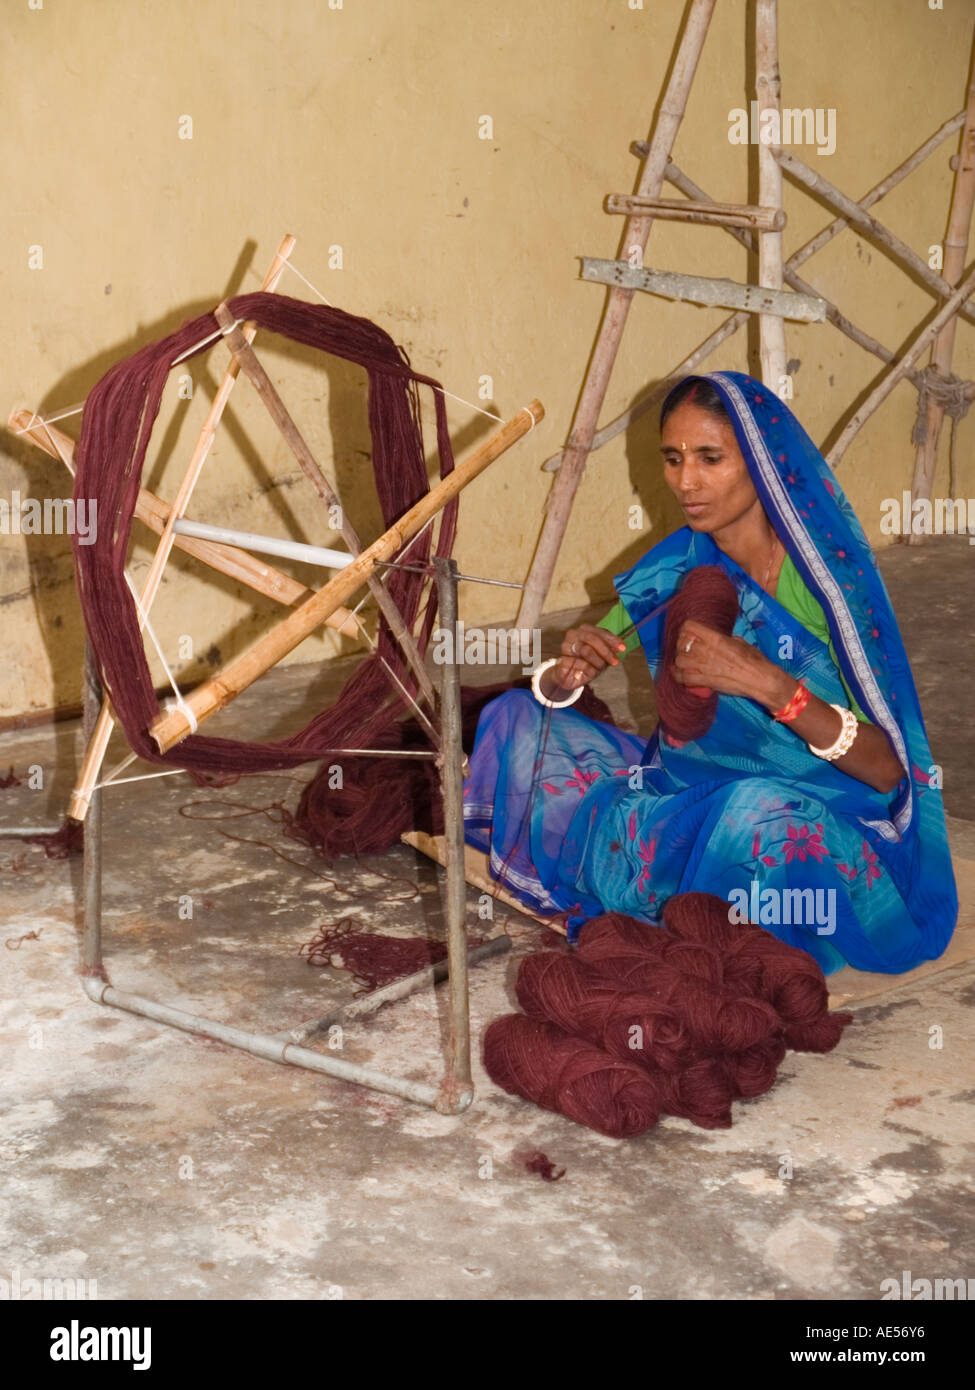 Demonstration of spinning wool with Asian lady in traditional dress sat on floor Stock Photo